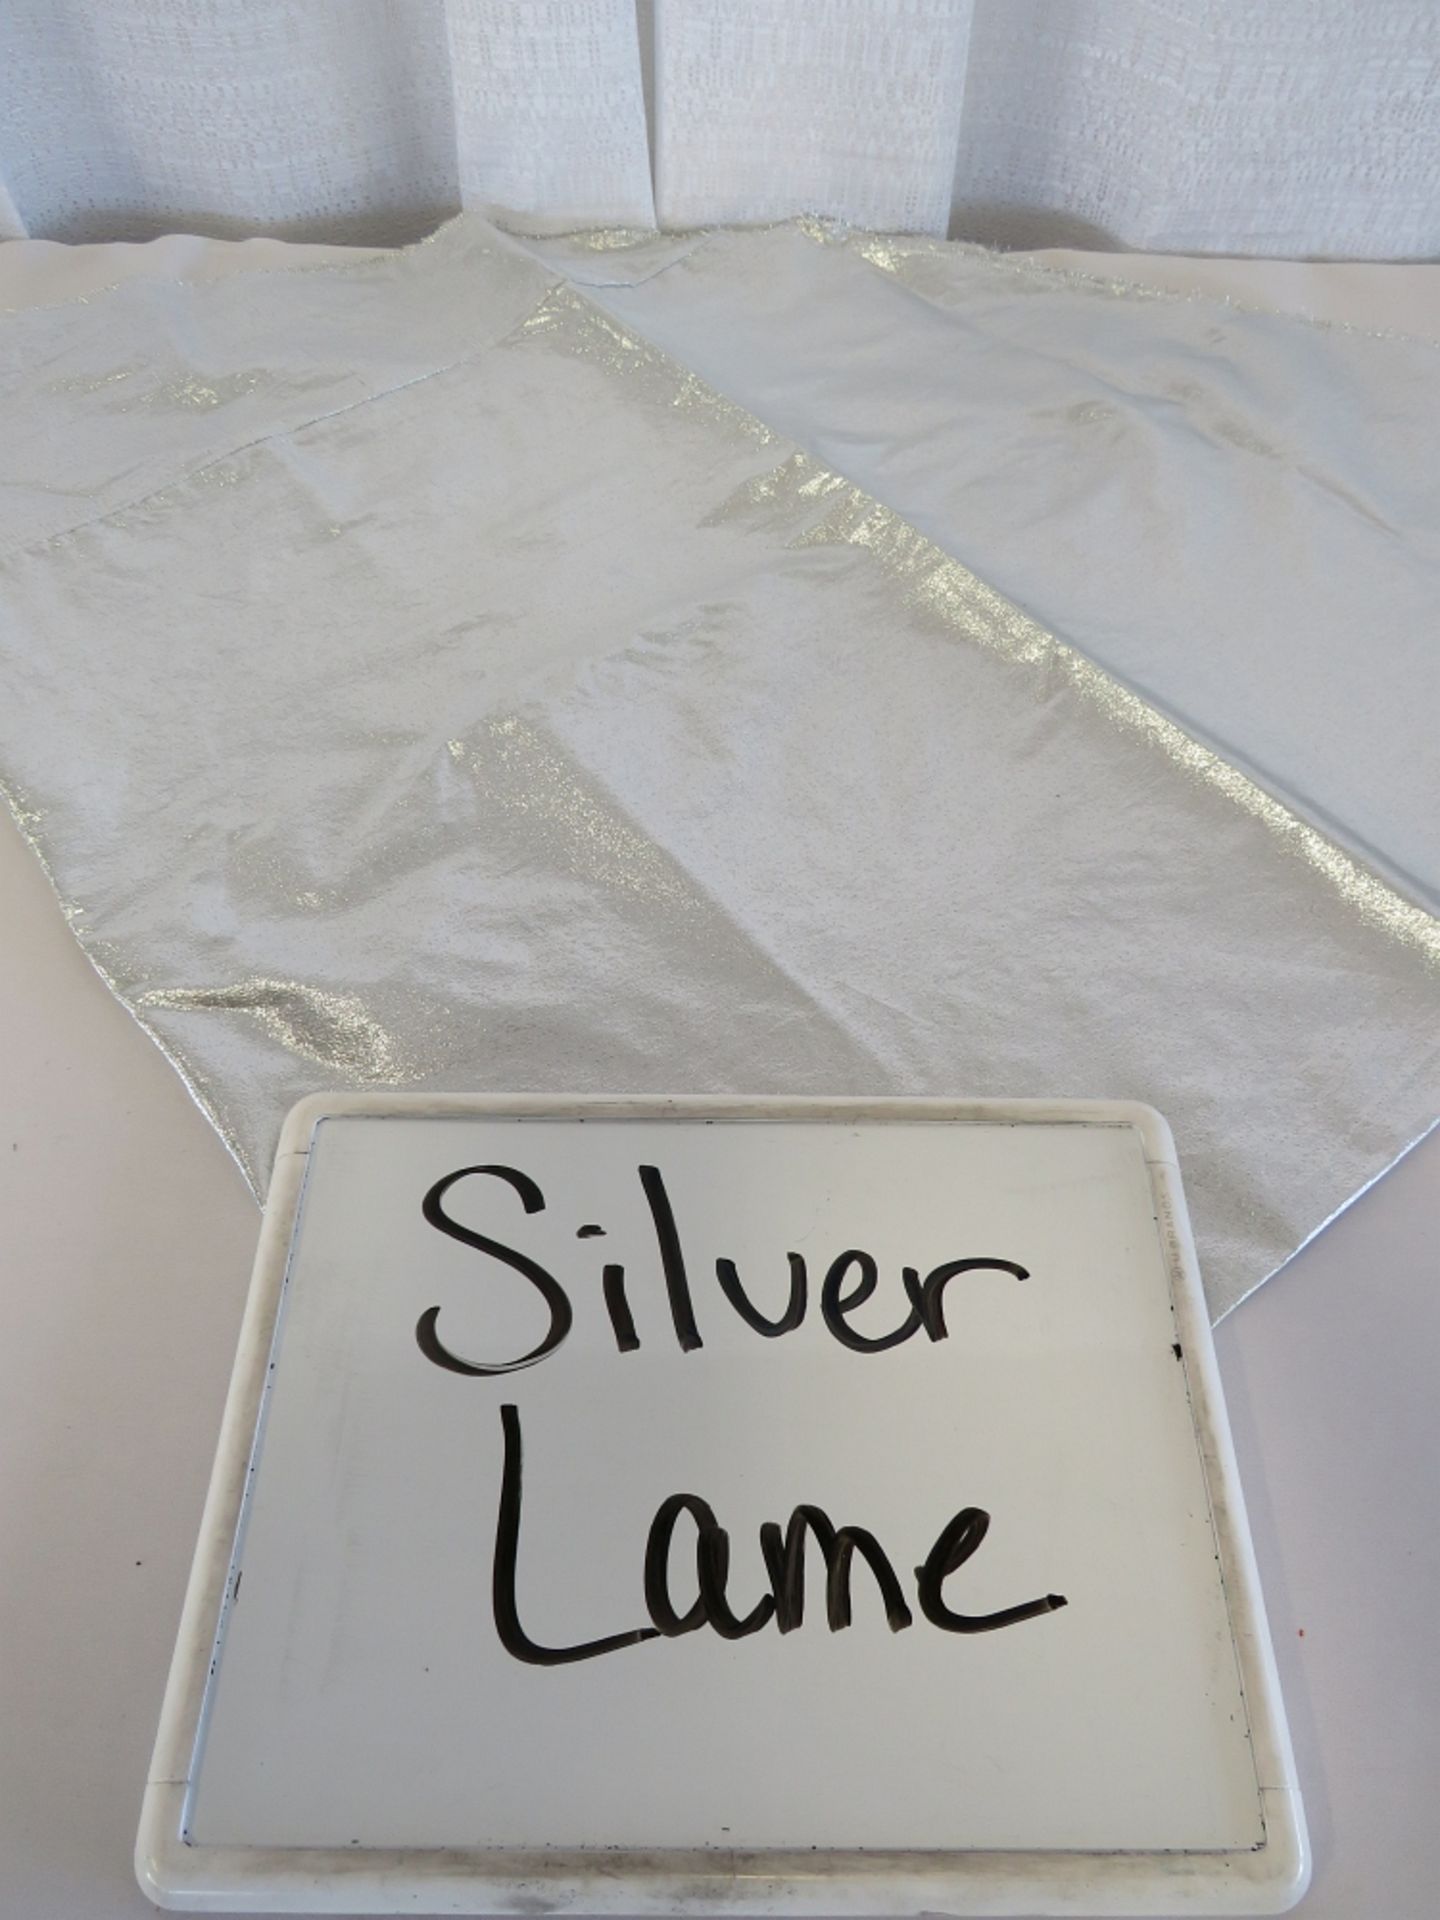 60" x 120" Tablecloth, Lame Silver